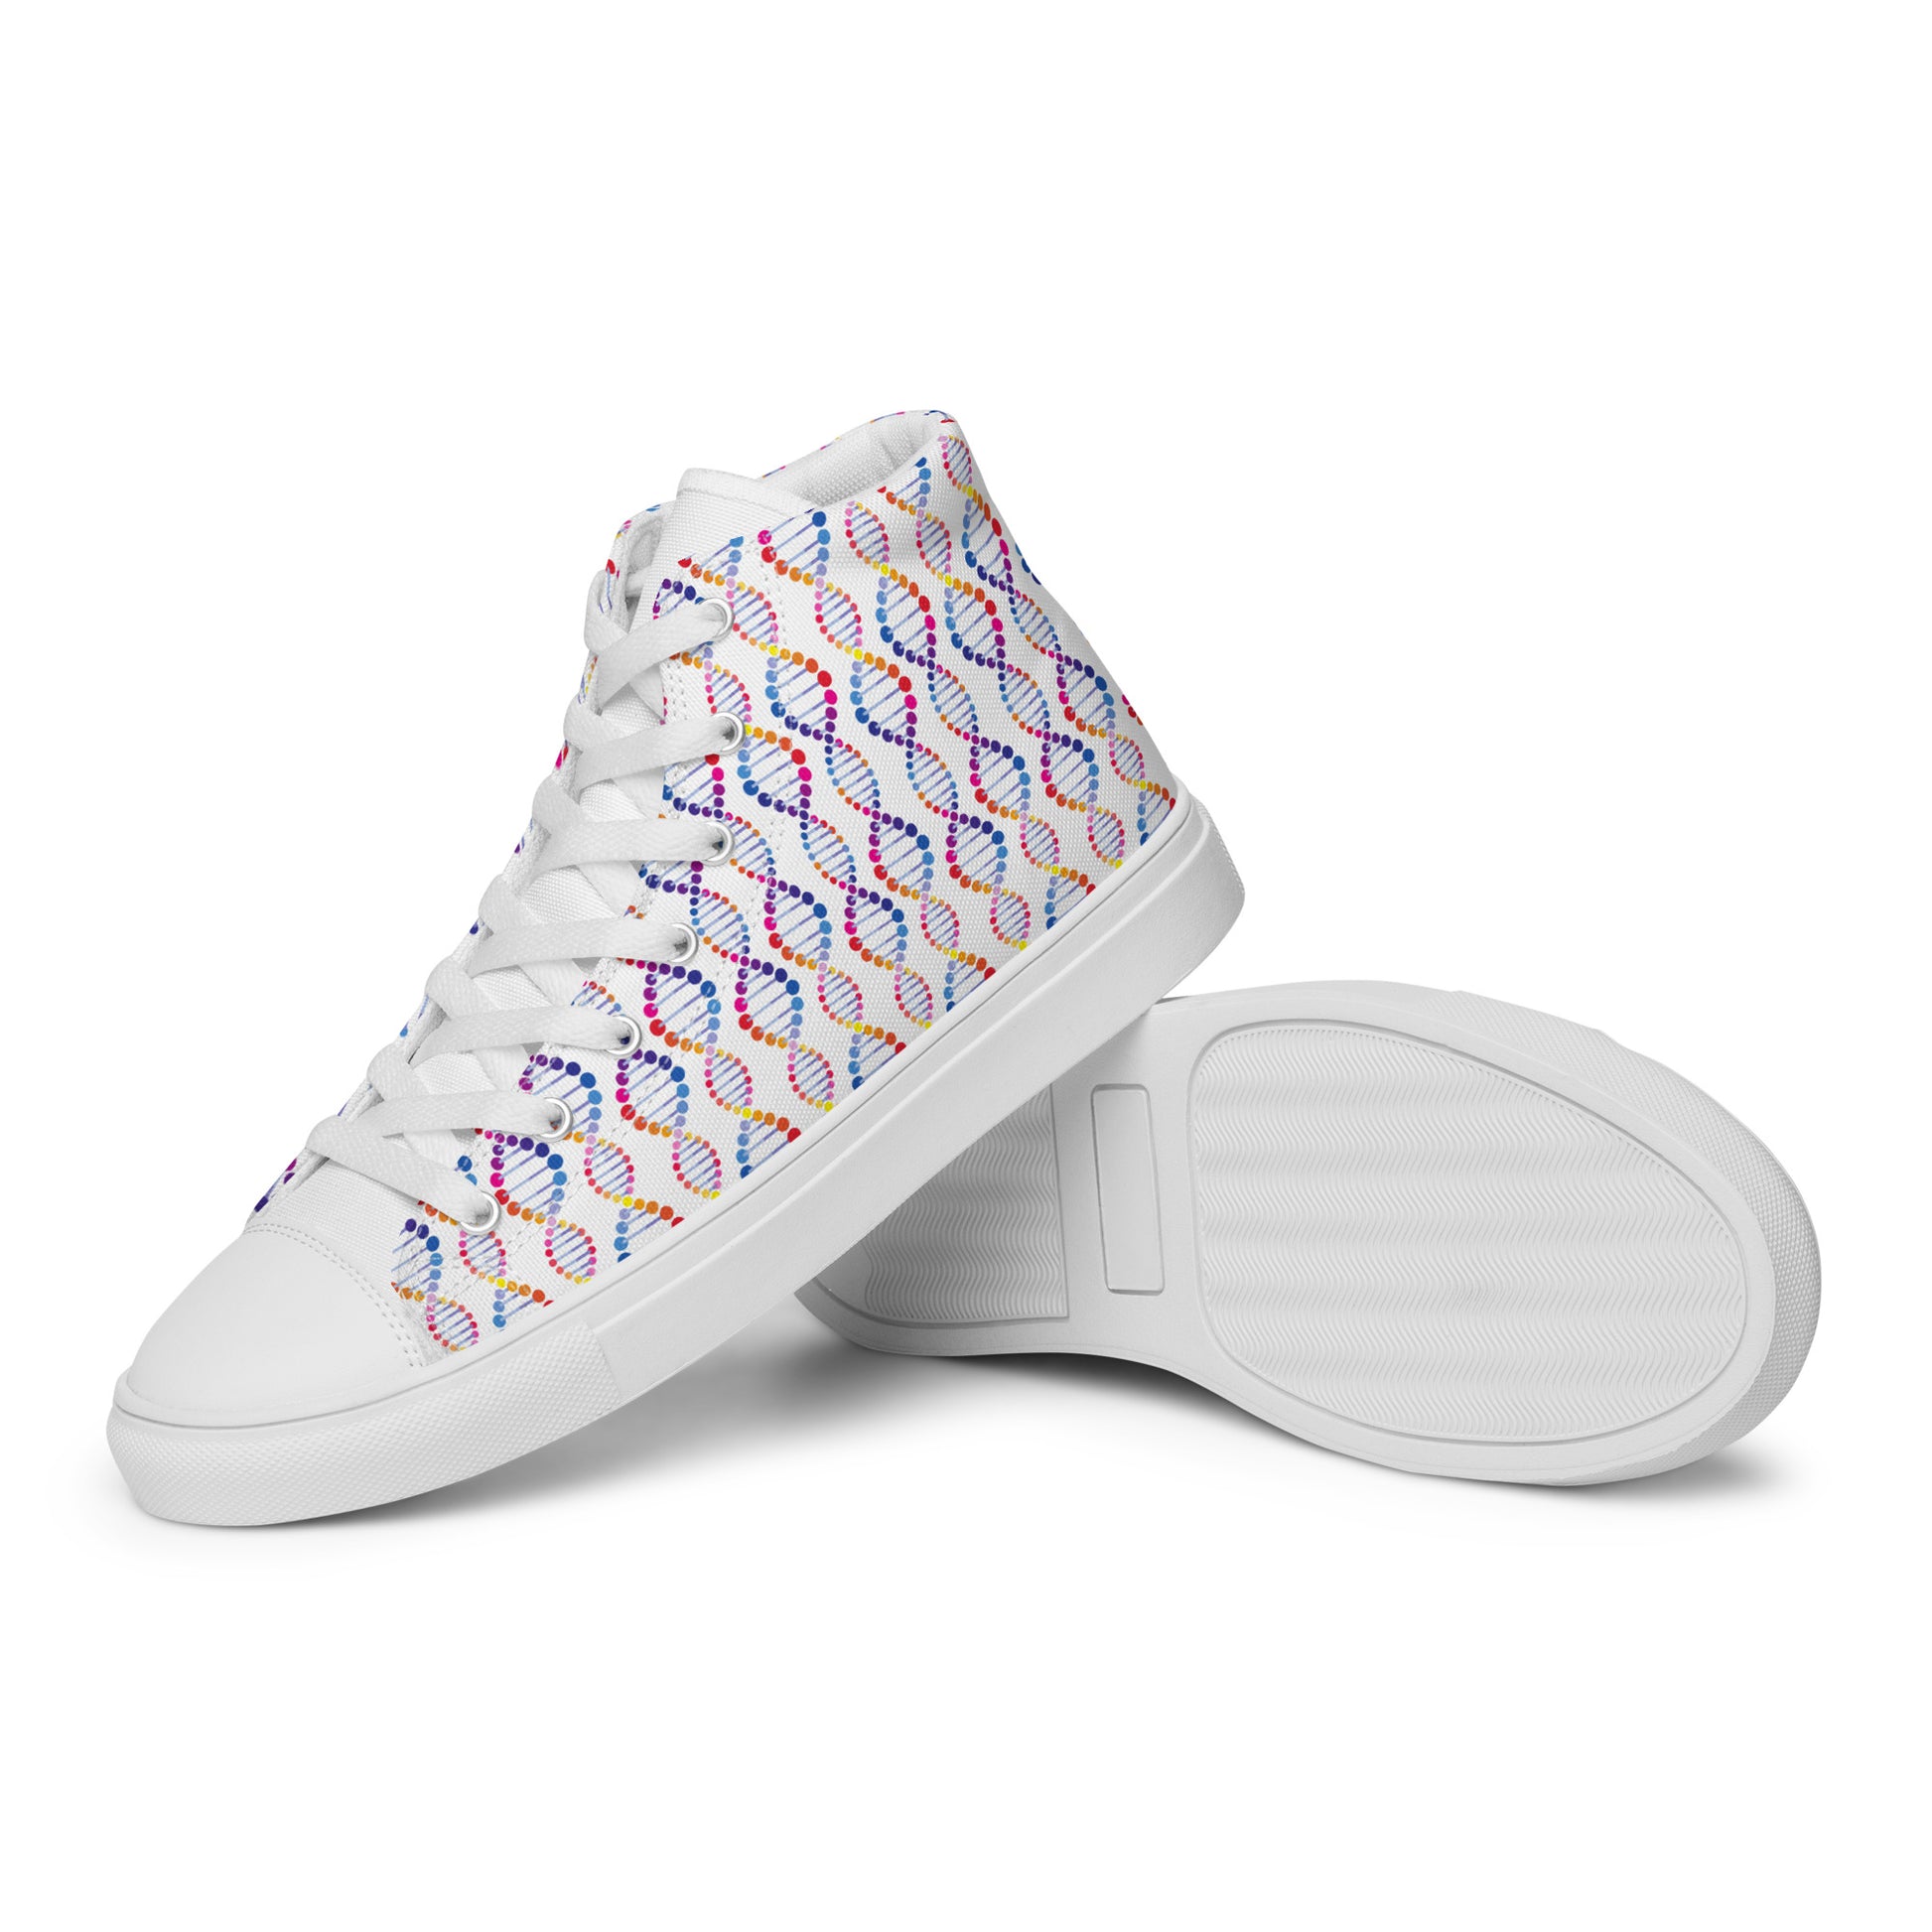 DNA - Women’s high top canvas shoes Womens High Top Shoes Outside Australia